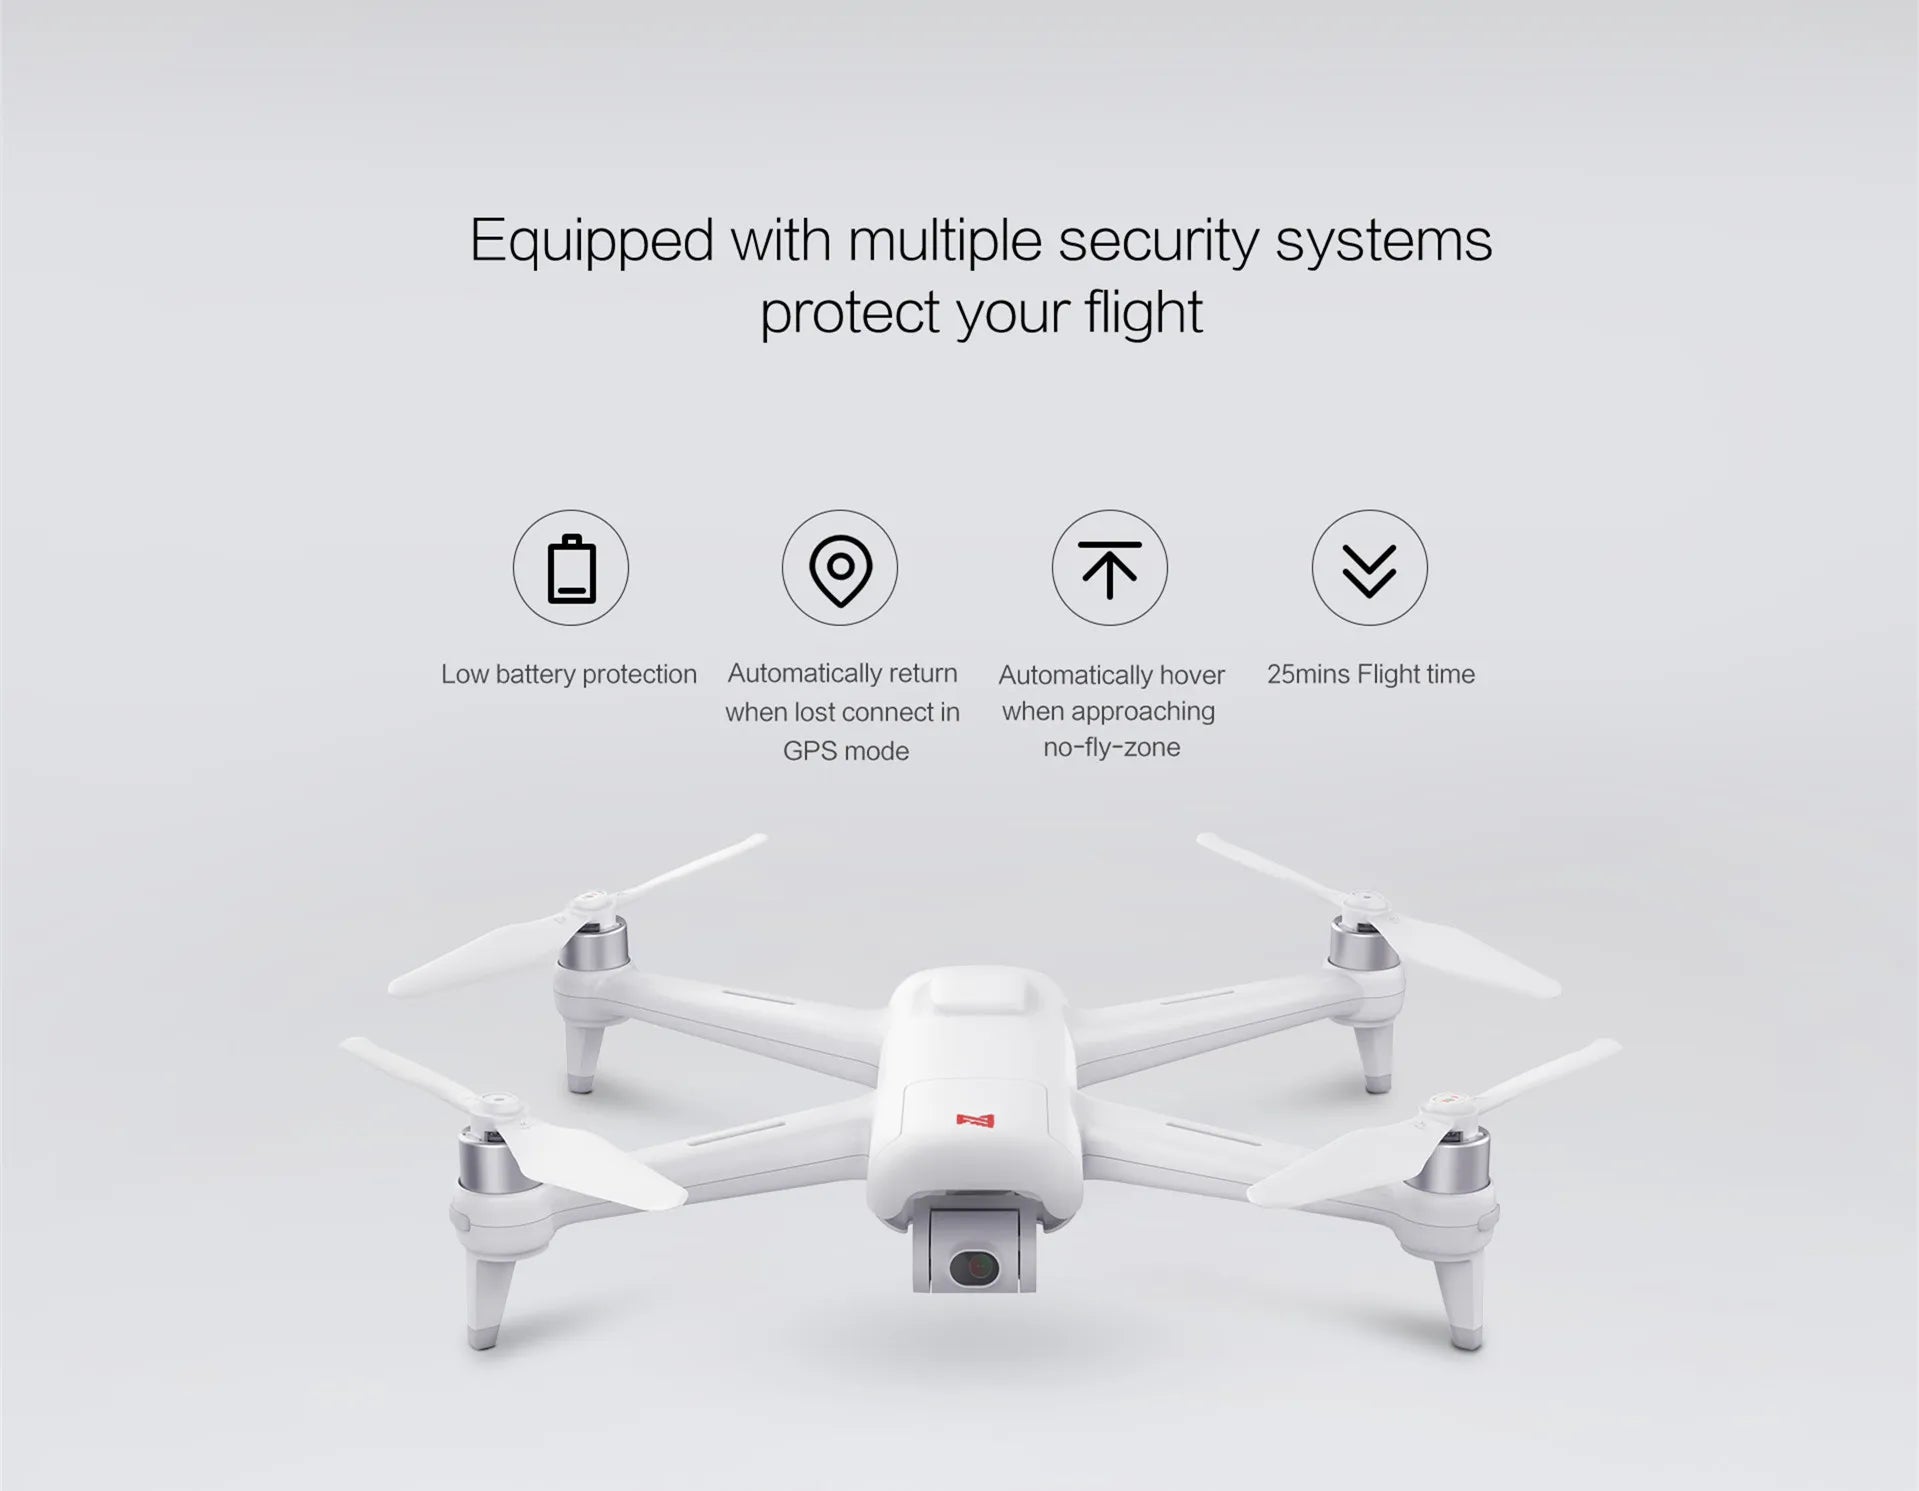 Xiaomi FIMI A3 Drone, Enhanced security systems protect your flight Low battery protection Automatically return Automatically hover 25mins